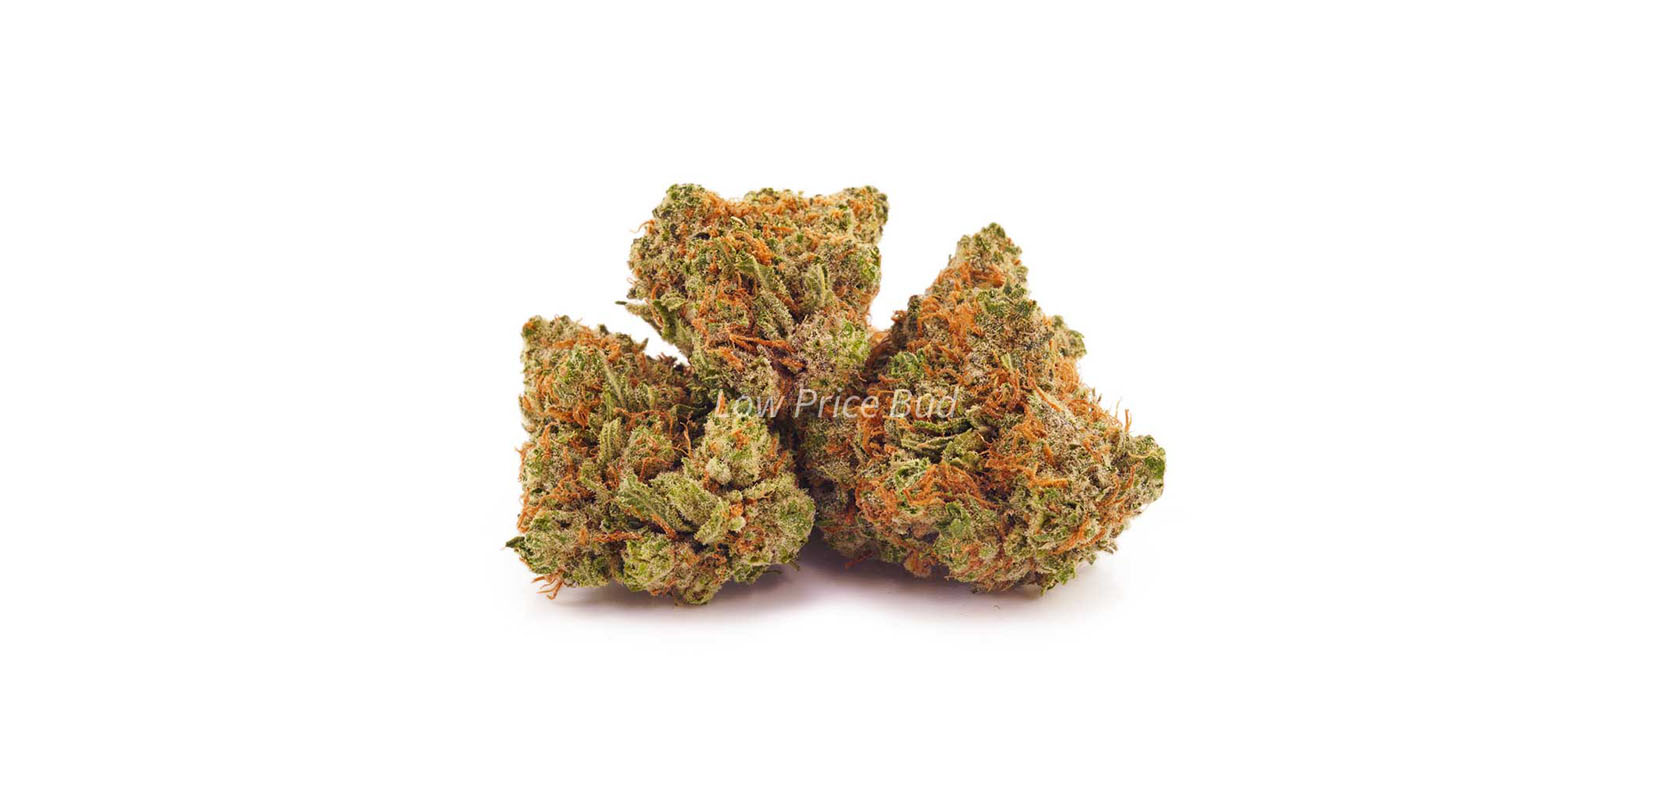 Lemon Haze value buds from cheapweed dispensary Low Price Bud BC cannabis store and online dispensary Canada for mail order marijuana. buy weed.